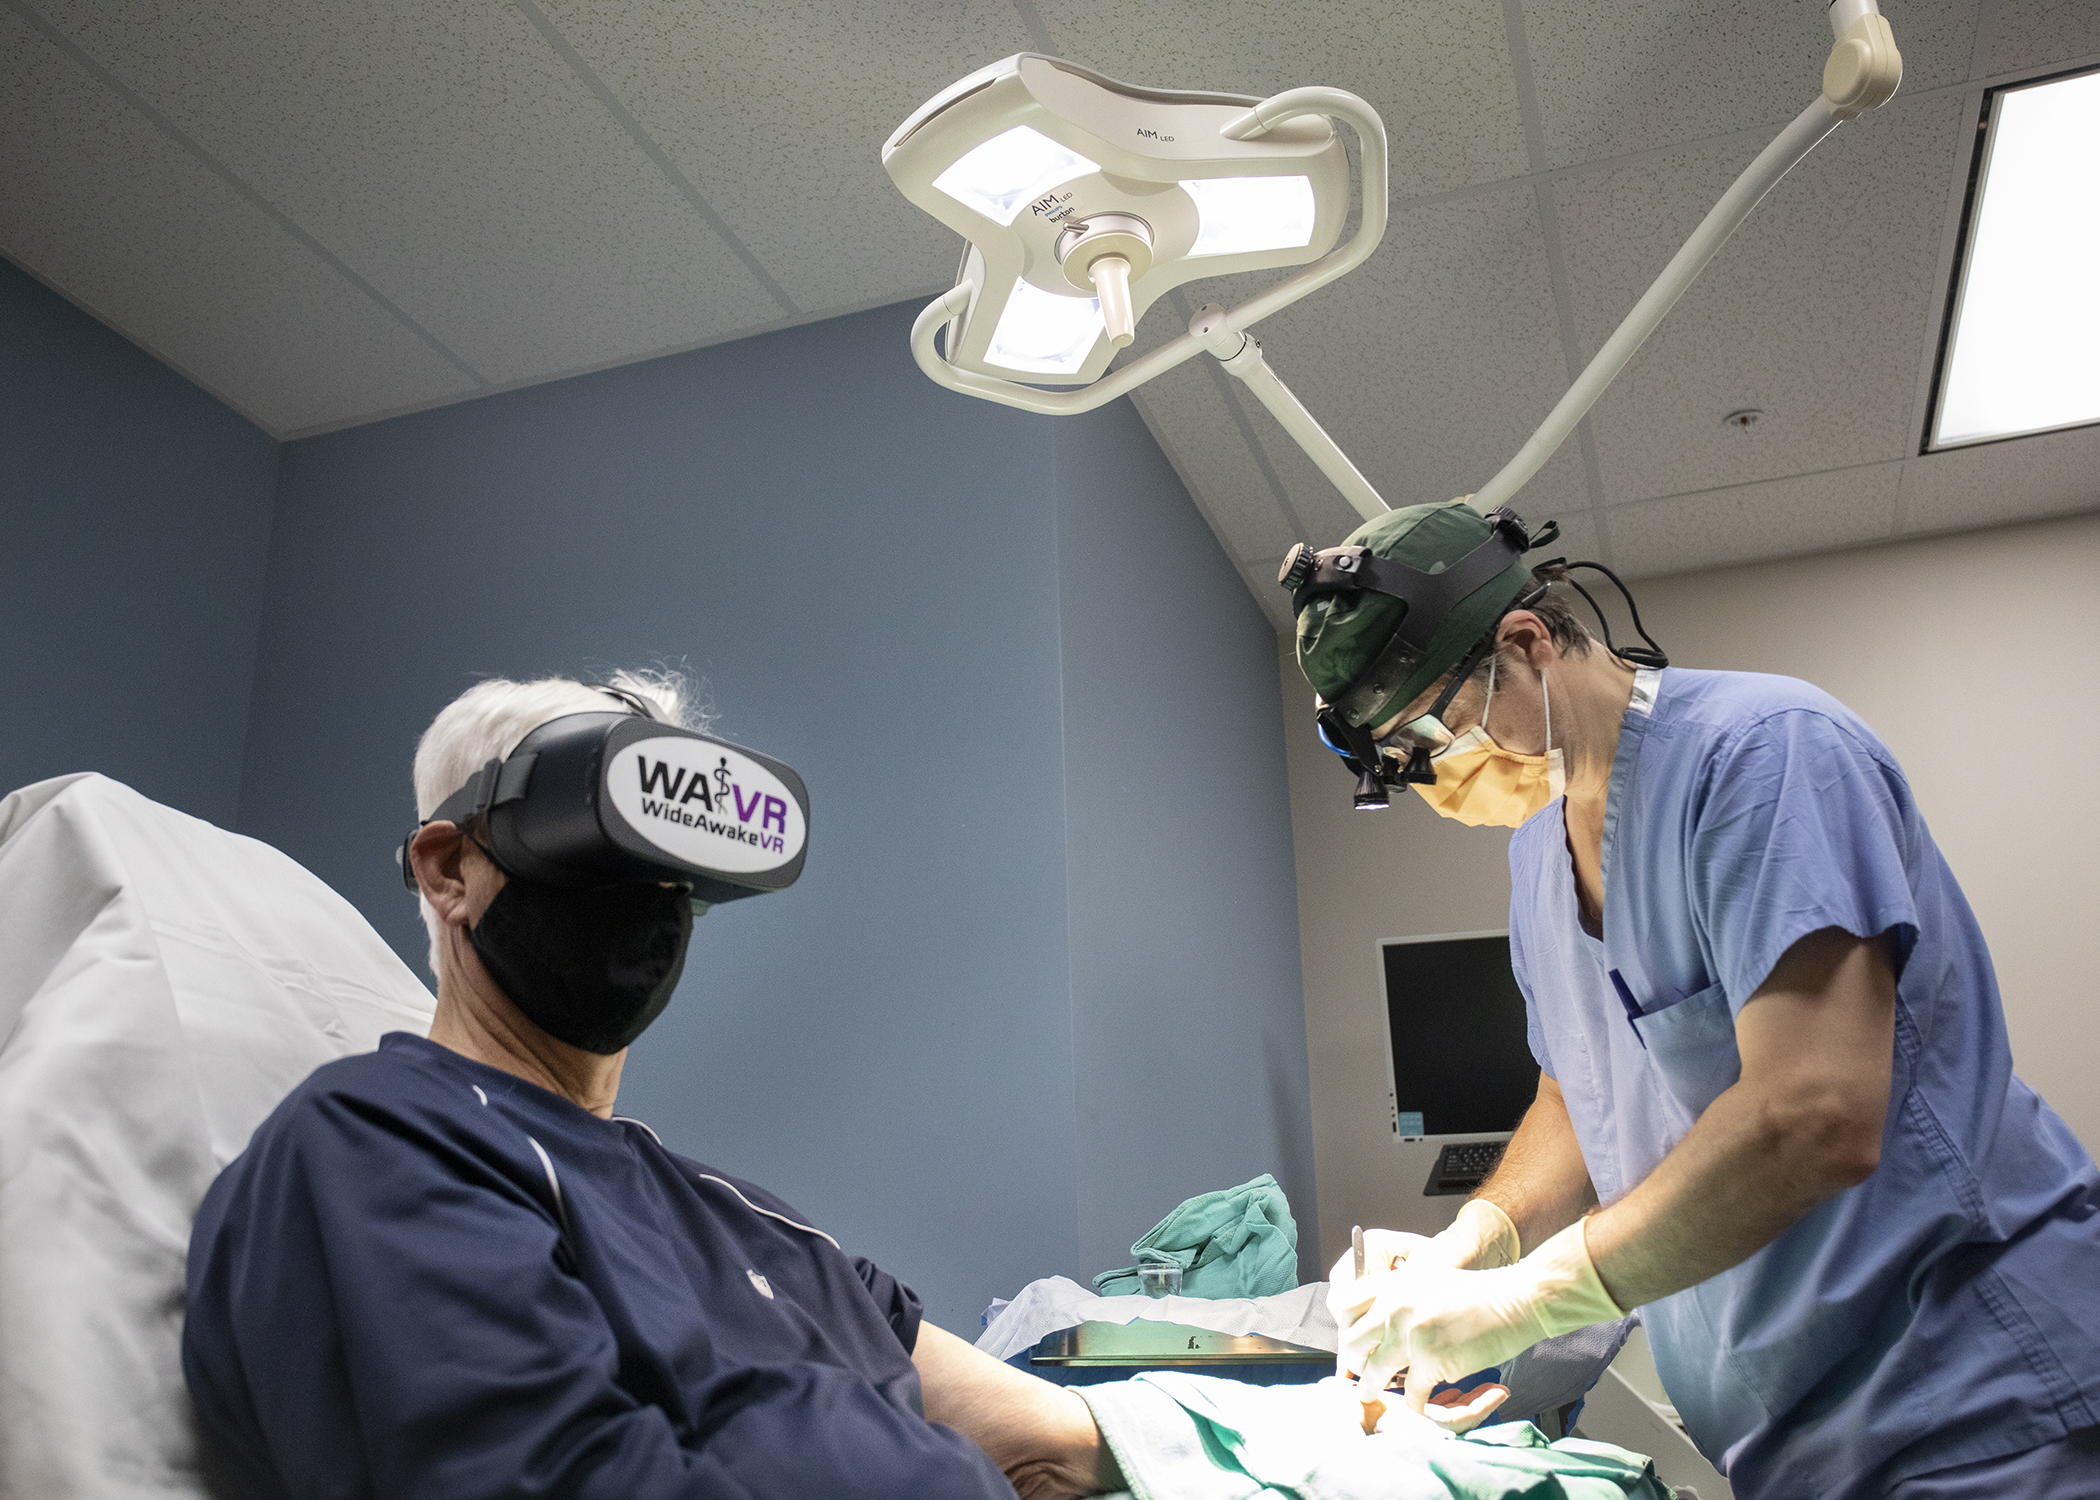 MSU Health Care hand surgeon James Clarkson, MD, performs WideAwake VR surgery